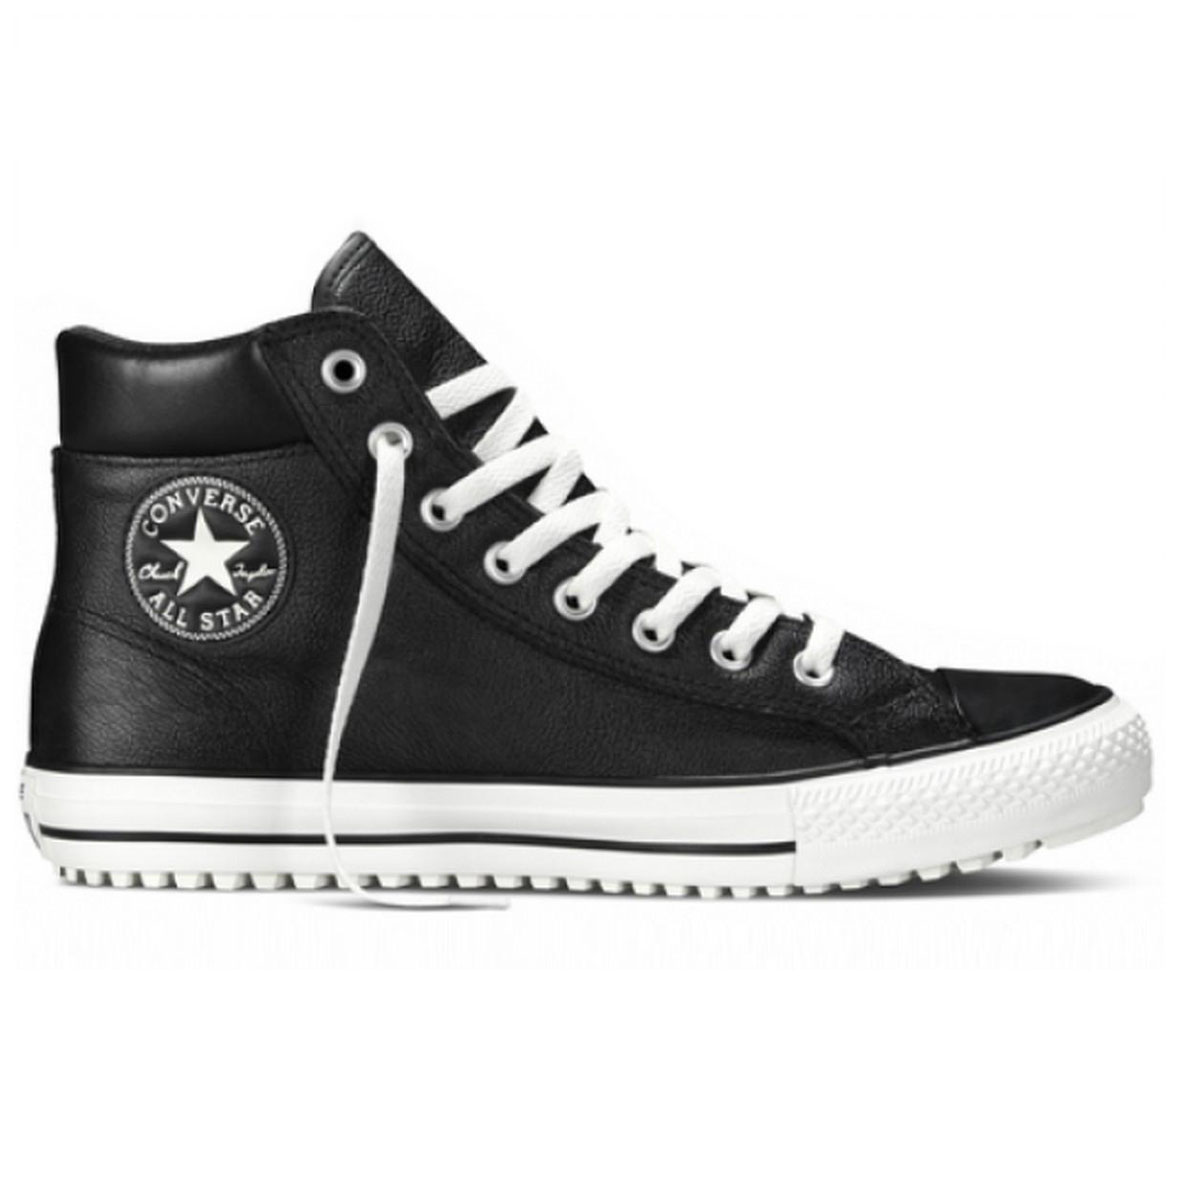 Converse Men's All Star Leather Hi Thinsulate® Shoe - SportingLife Blog